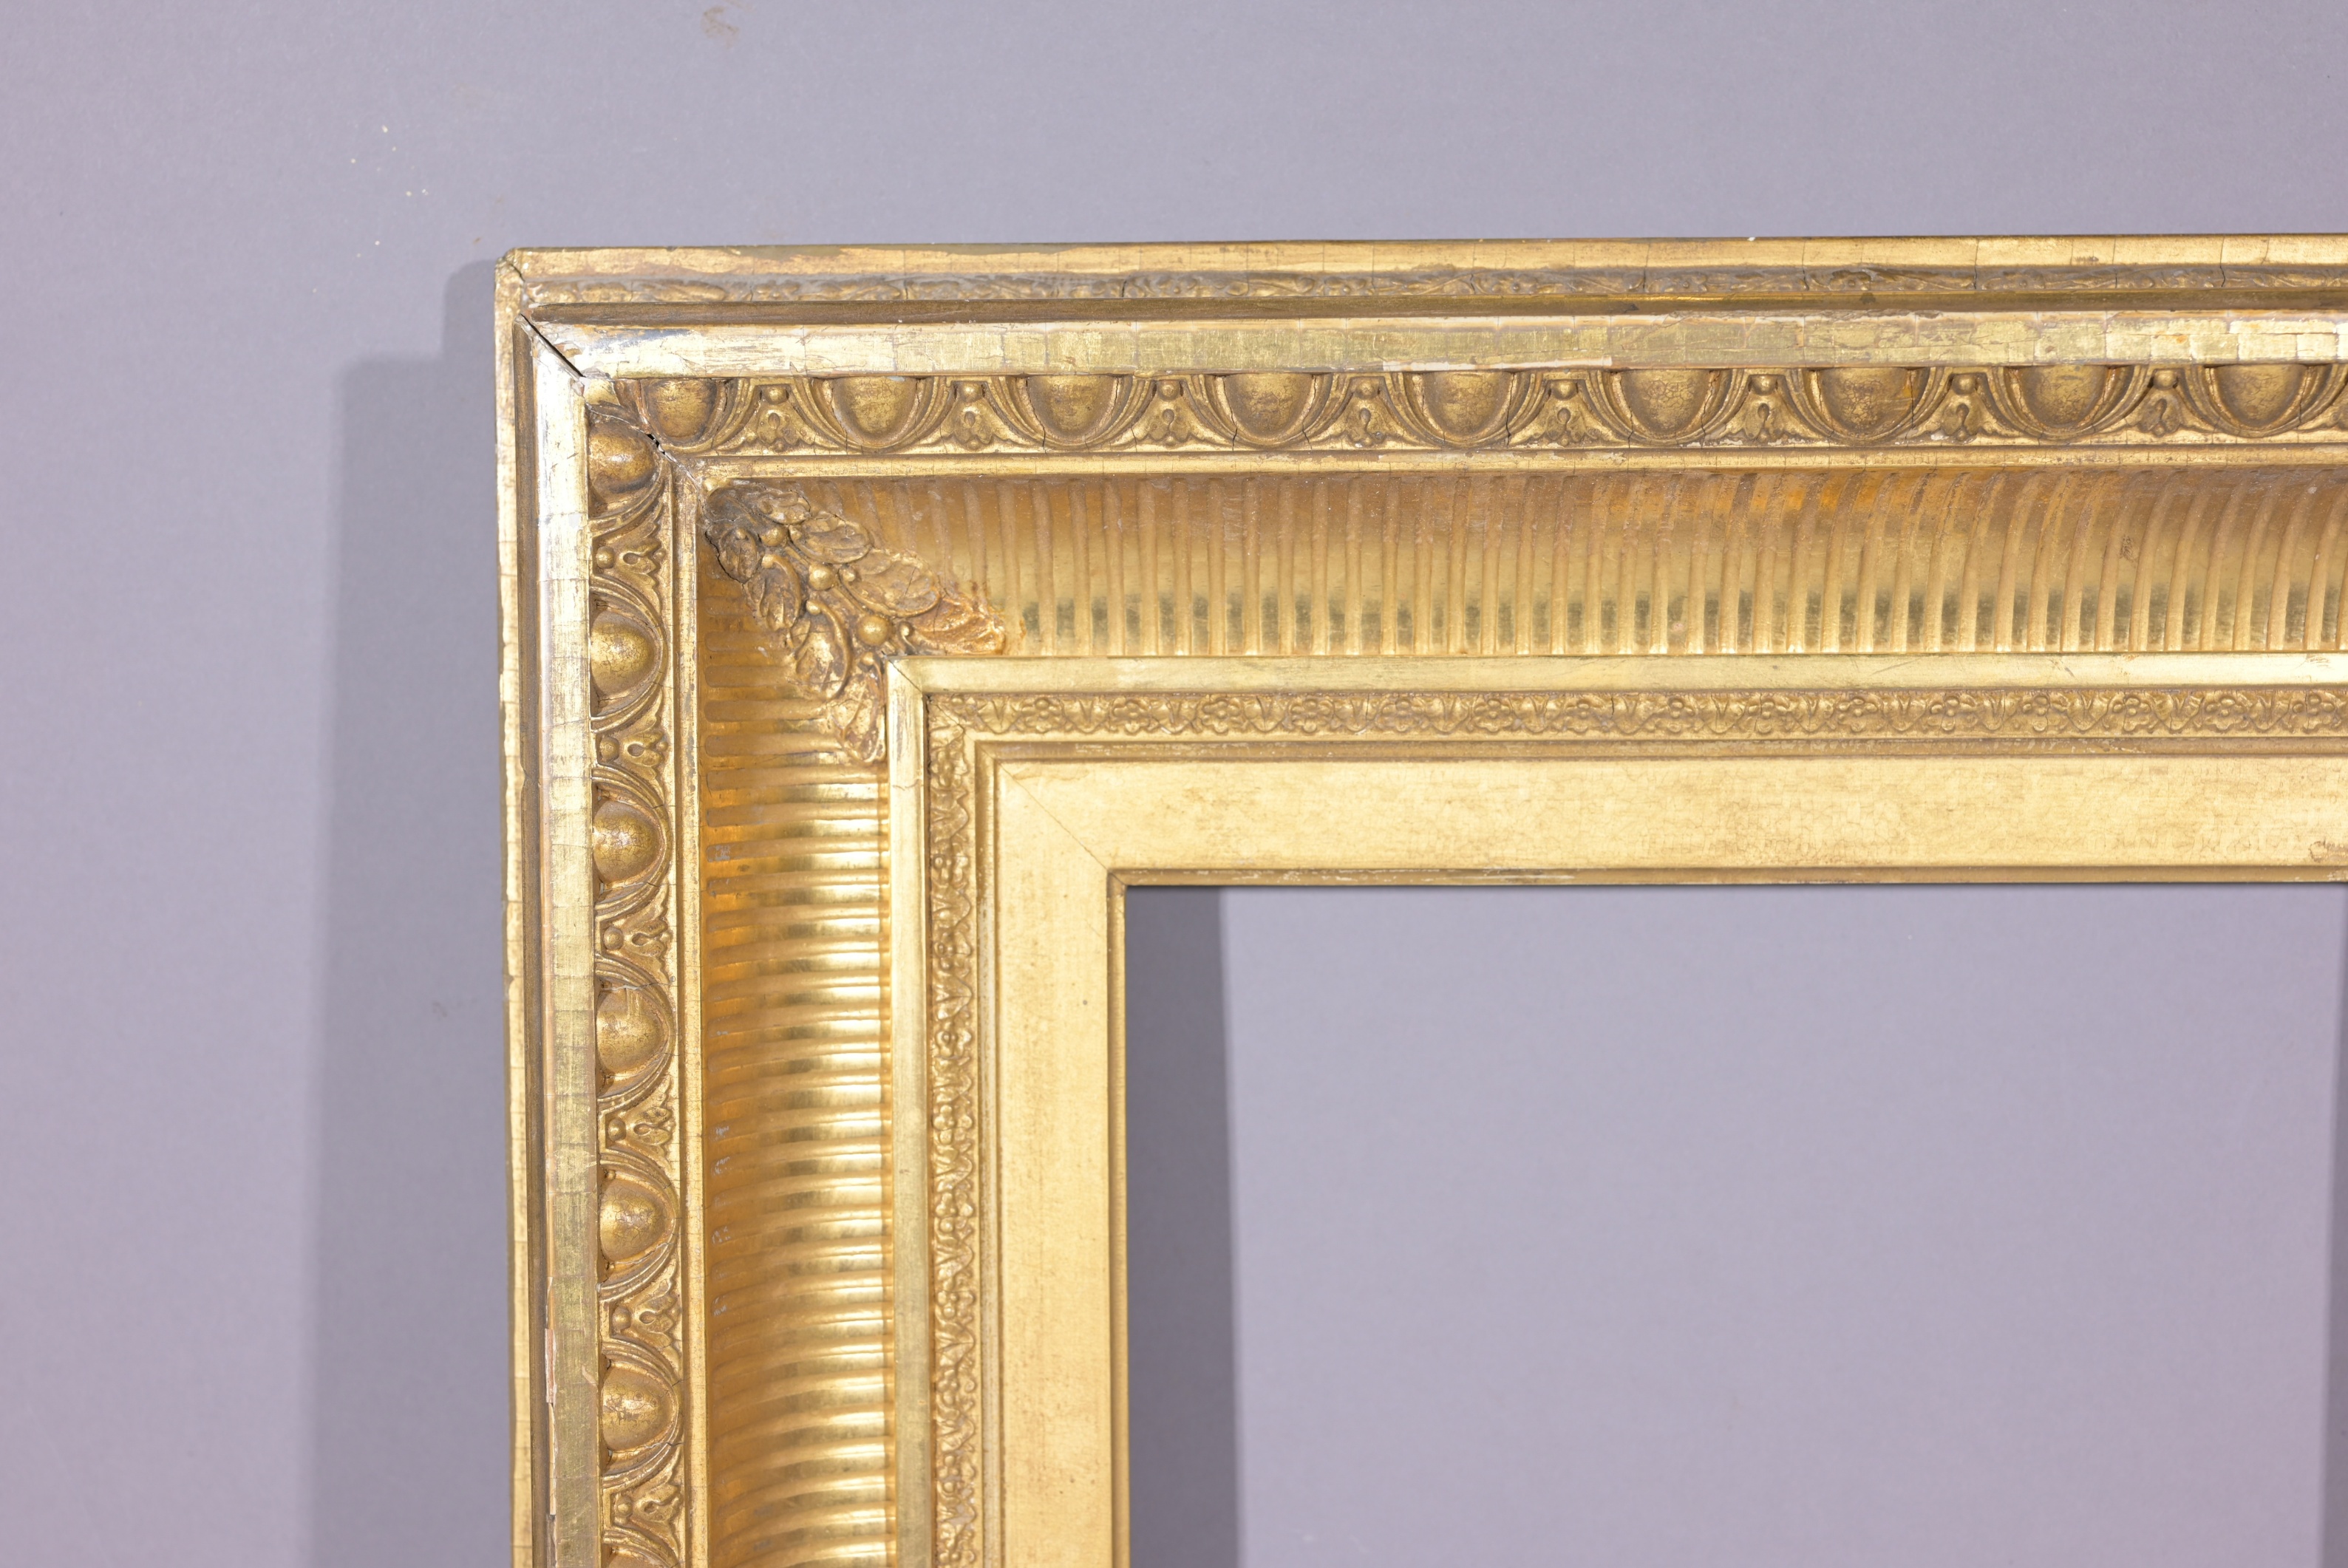 American c.1870's Fluted Cove Frame - 17.5 x 10 - Image 2 of 8